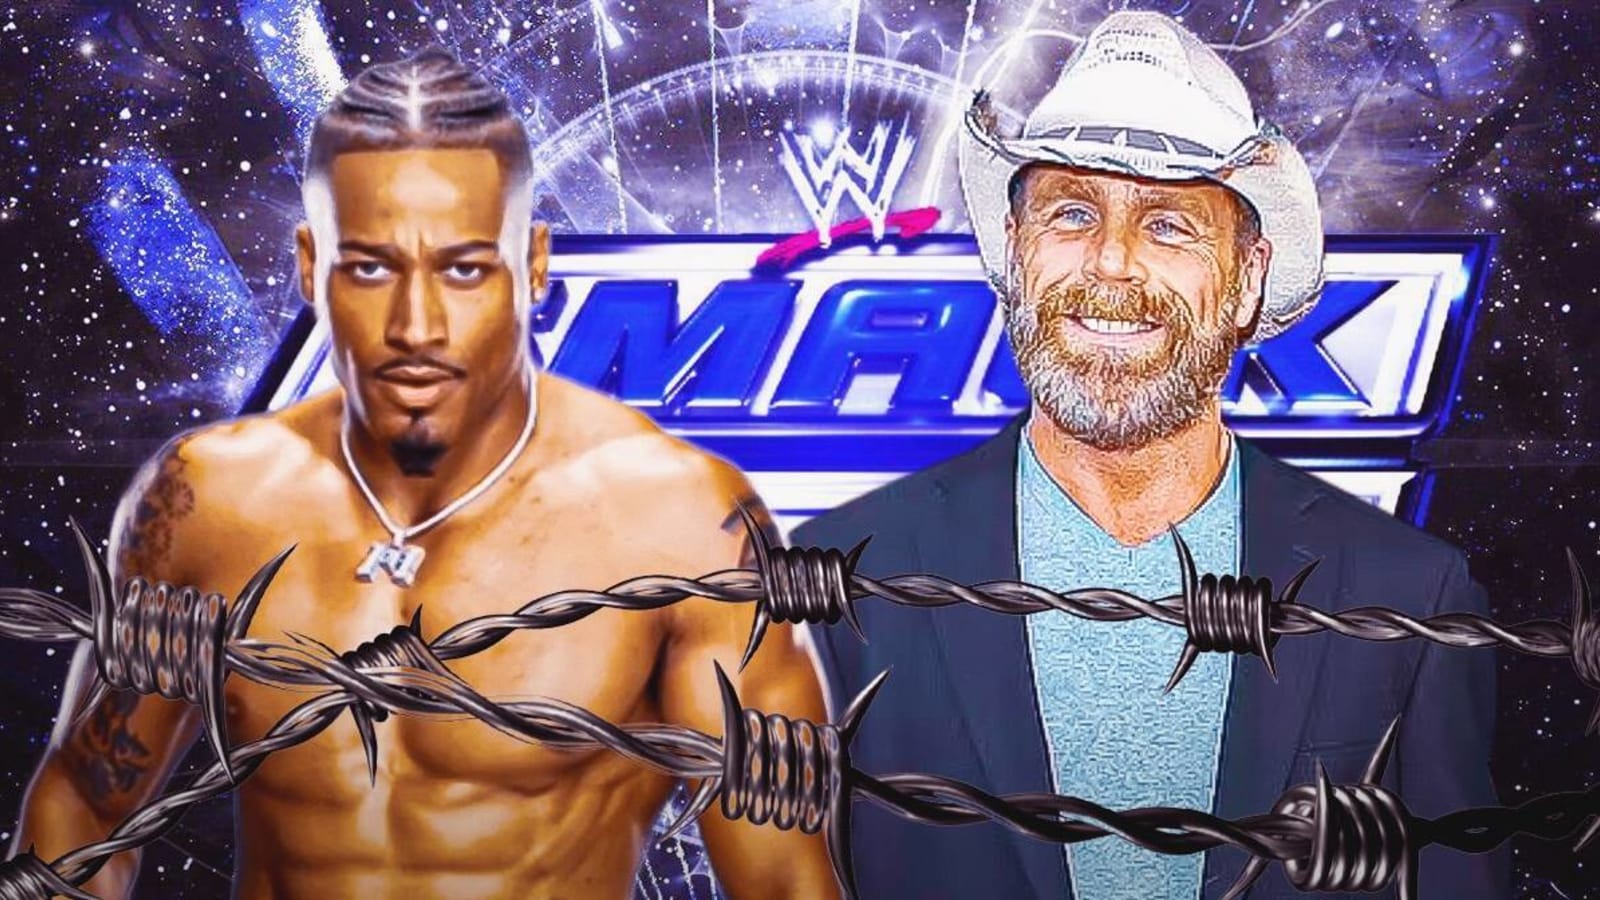 Carmelo Hayes celebrates his relationship with Shawn Michaels after being drafted to SmackDown